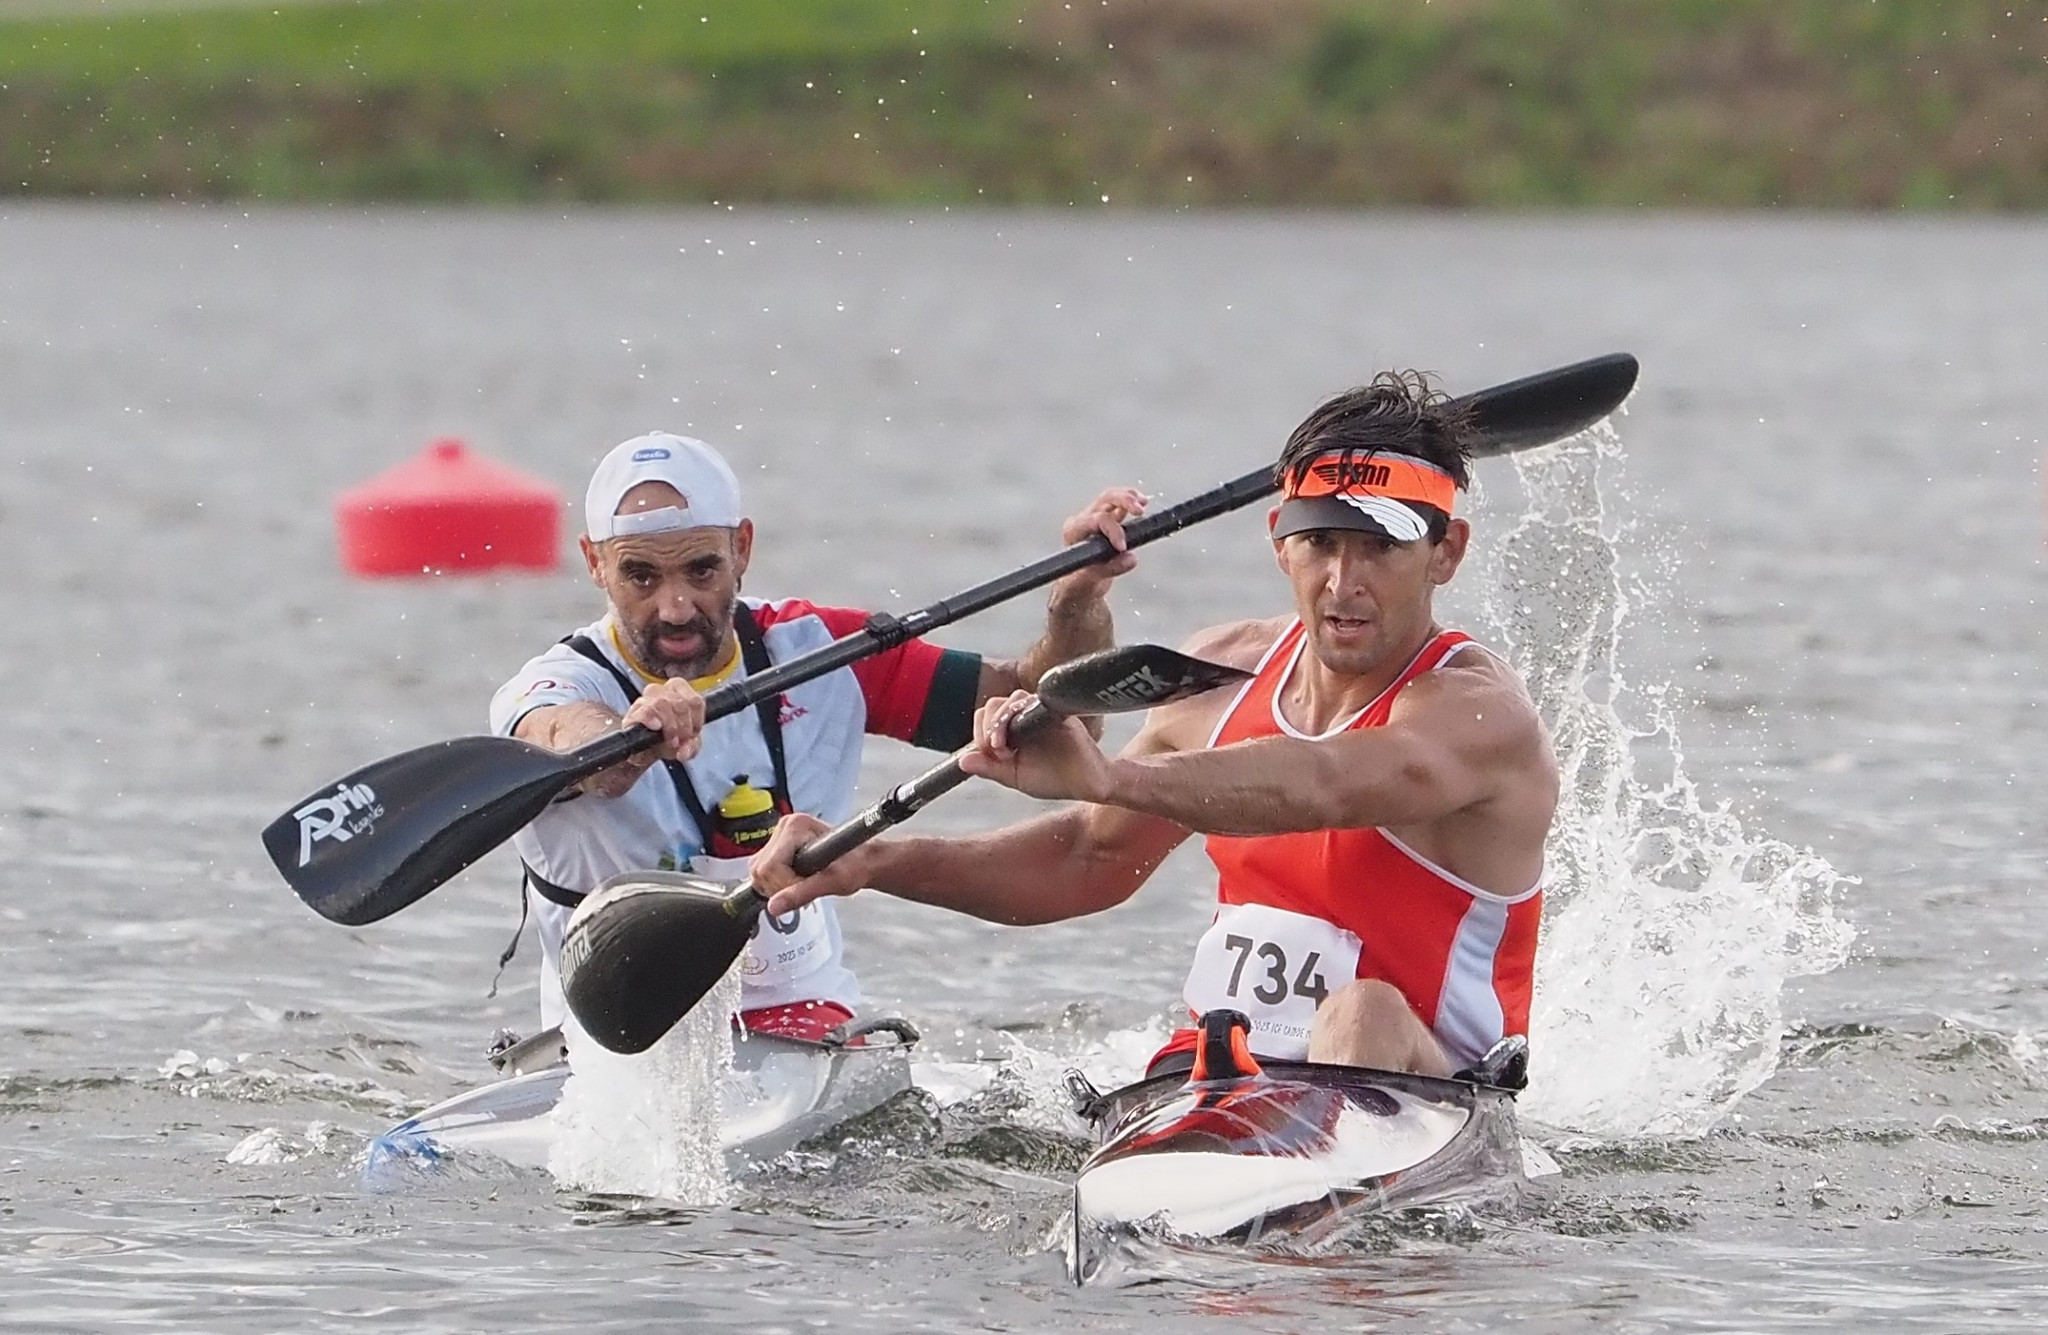 There were many closely-fought races across the masters categories ©Søren Wilhelmsen/2023 ICF Canoe Marathon World Championships, Denmark